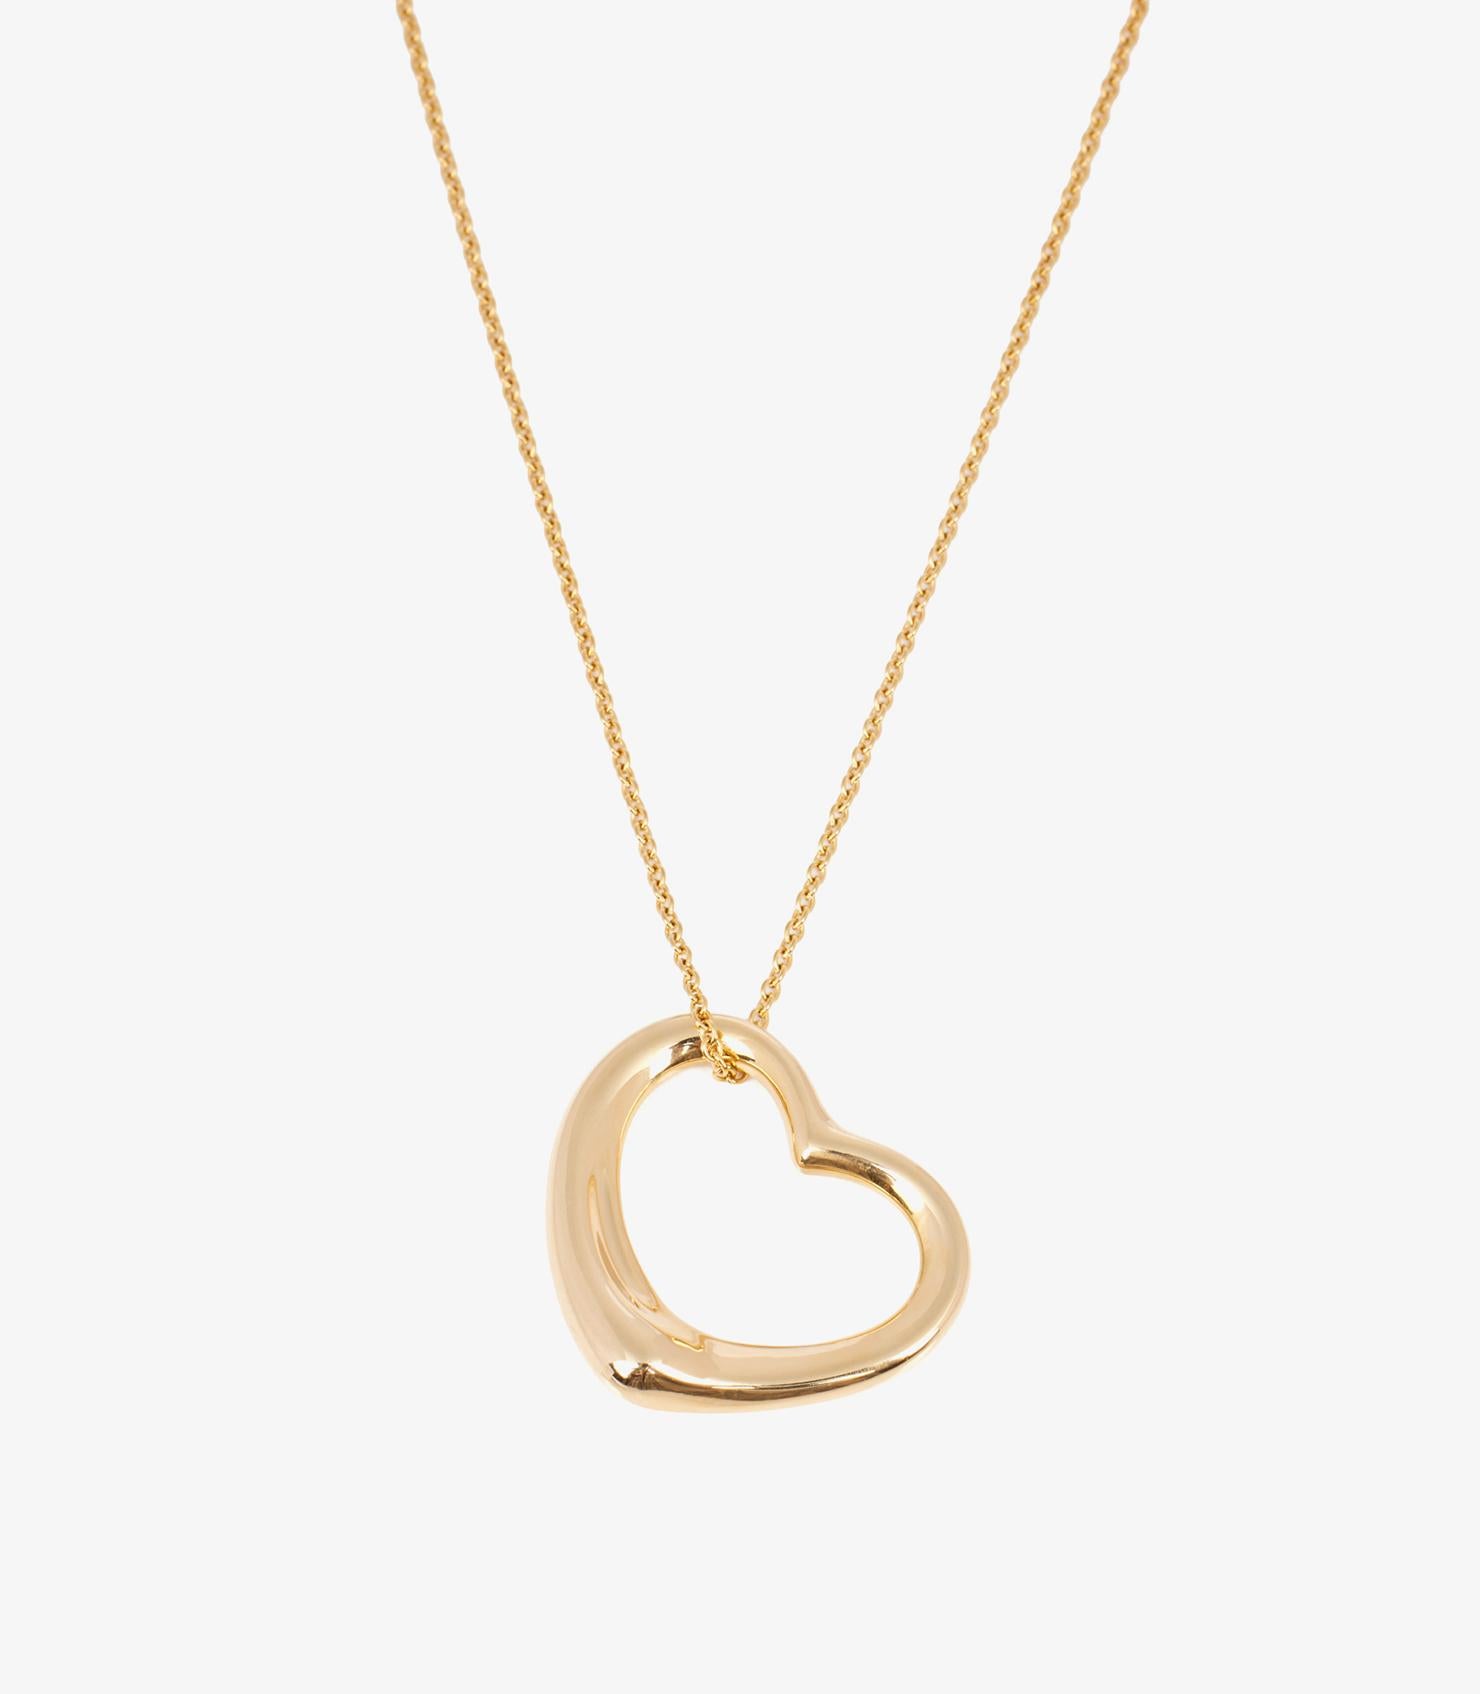 Tiffany & Co Elsa Peretti Open Heart Pendant In Excellent Condition For Sale In Bishop's Stortford, Hertfordshire